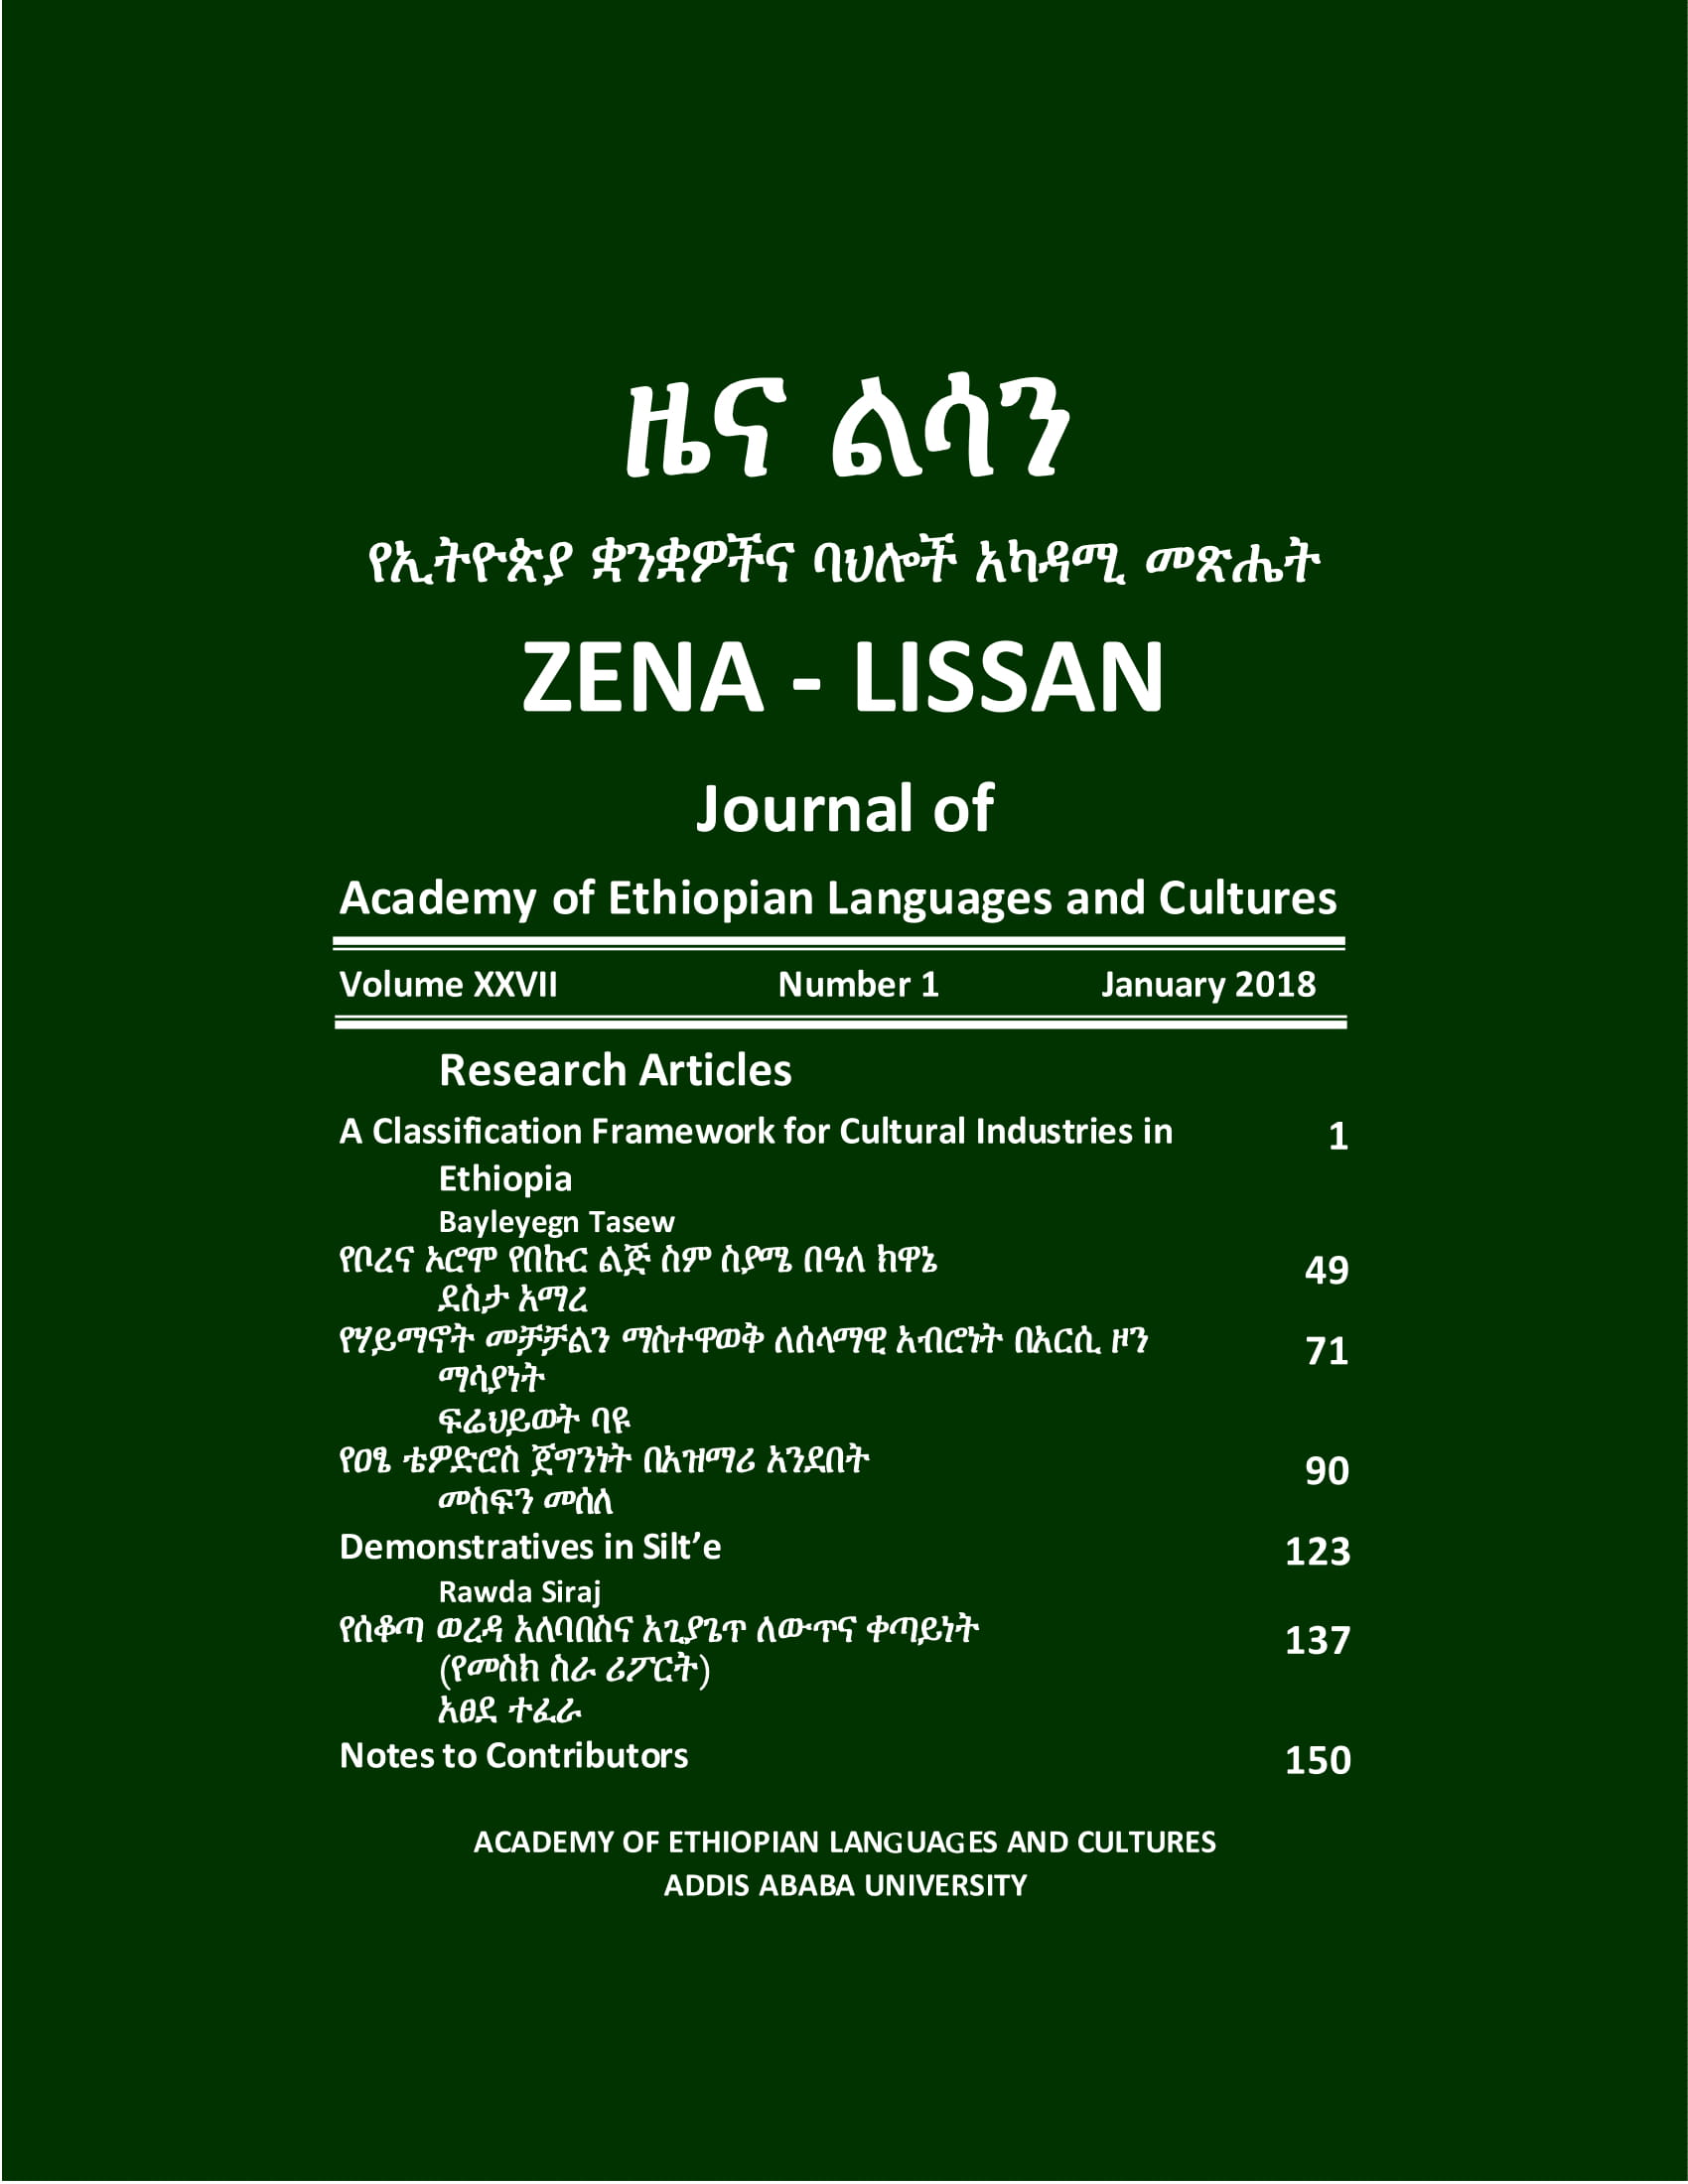 					View Vol. 27 No. 1 (2018): ZENA-LISSAN Journal of Ethiopian Languages and Cultures
				